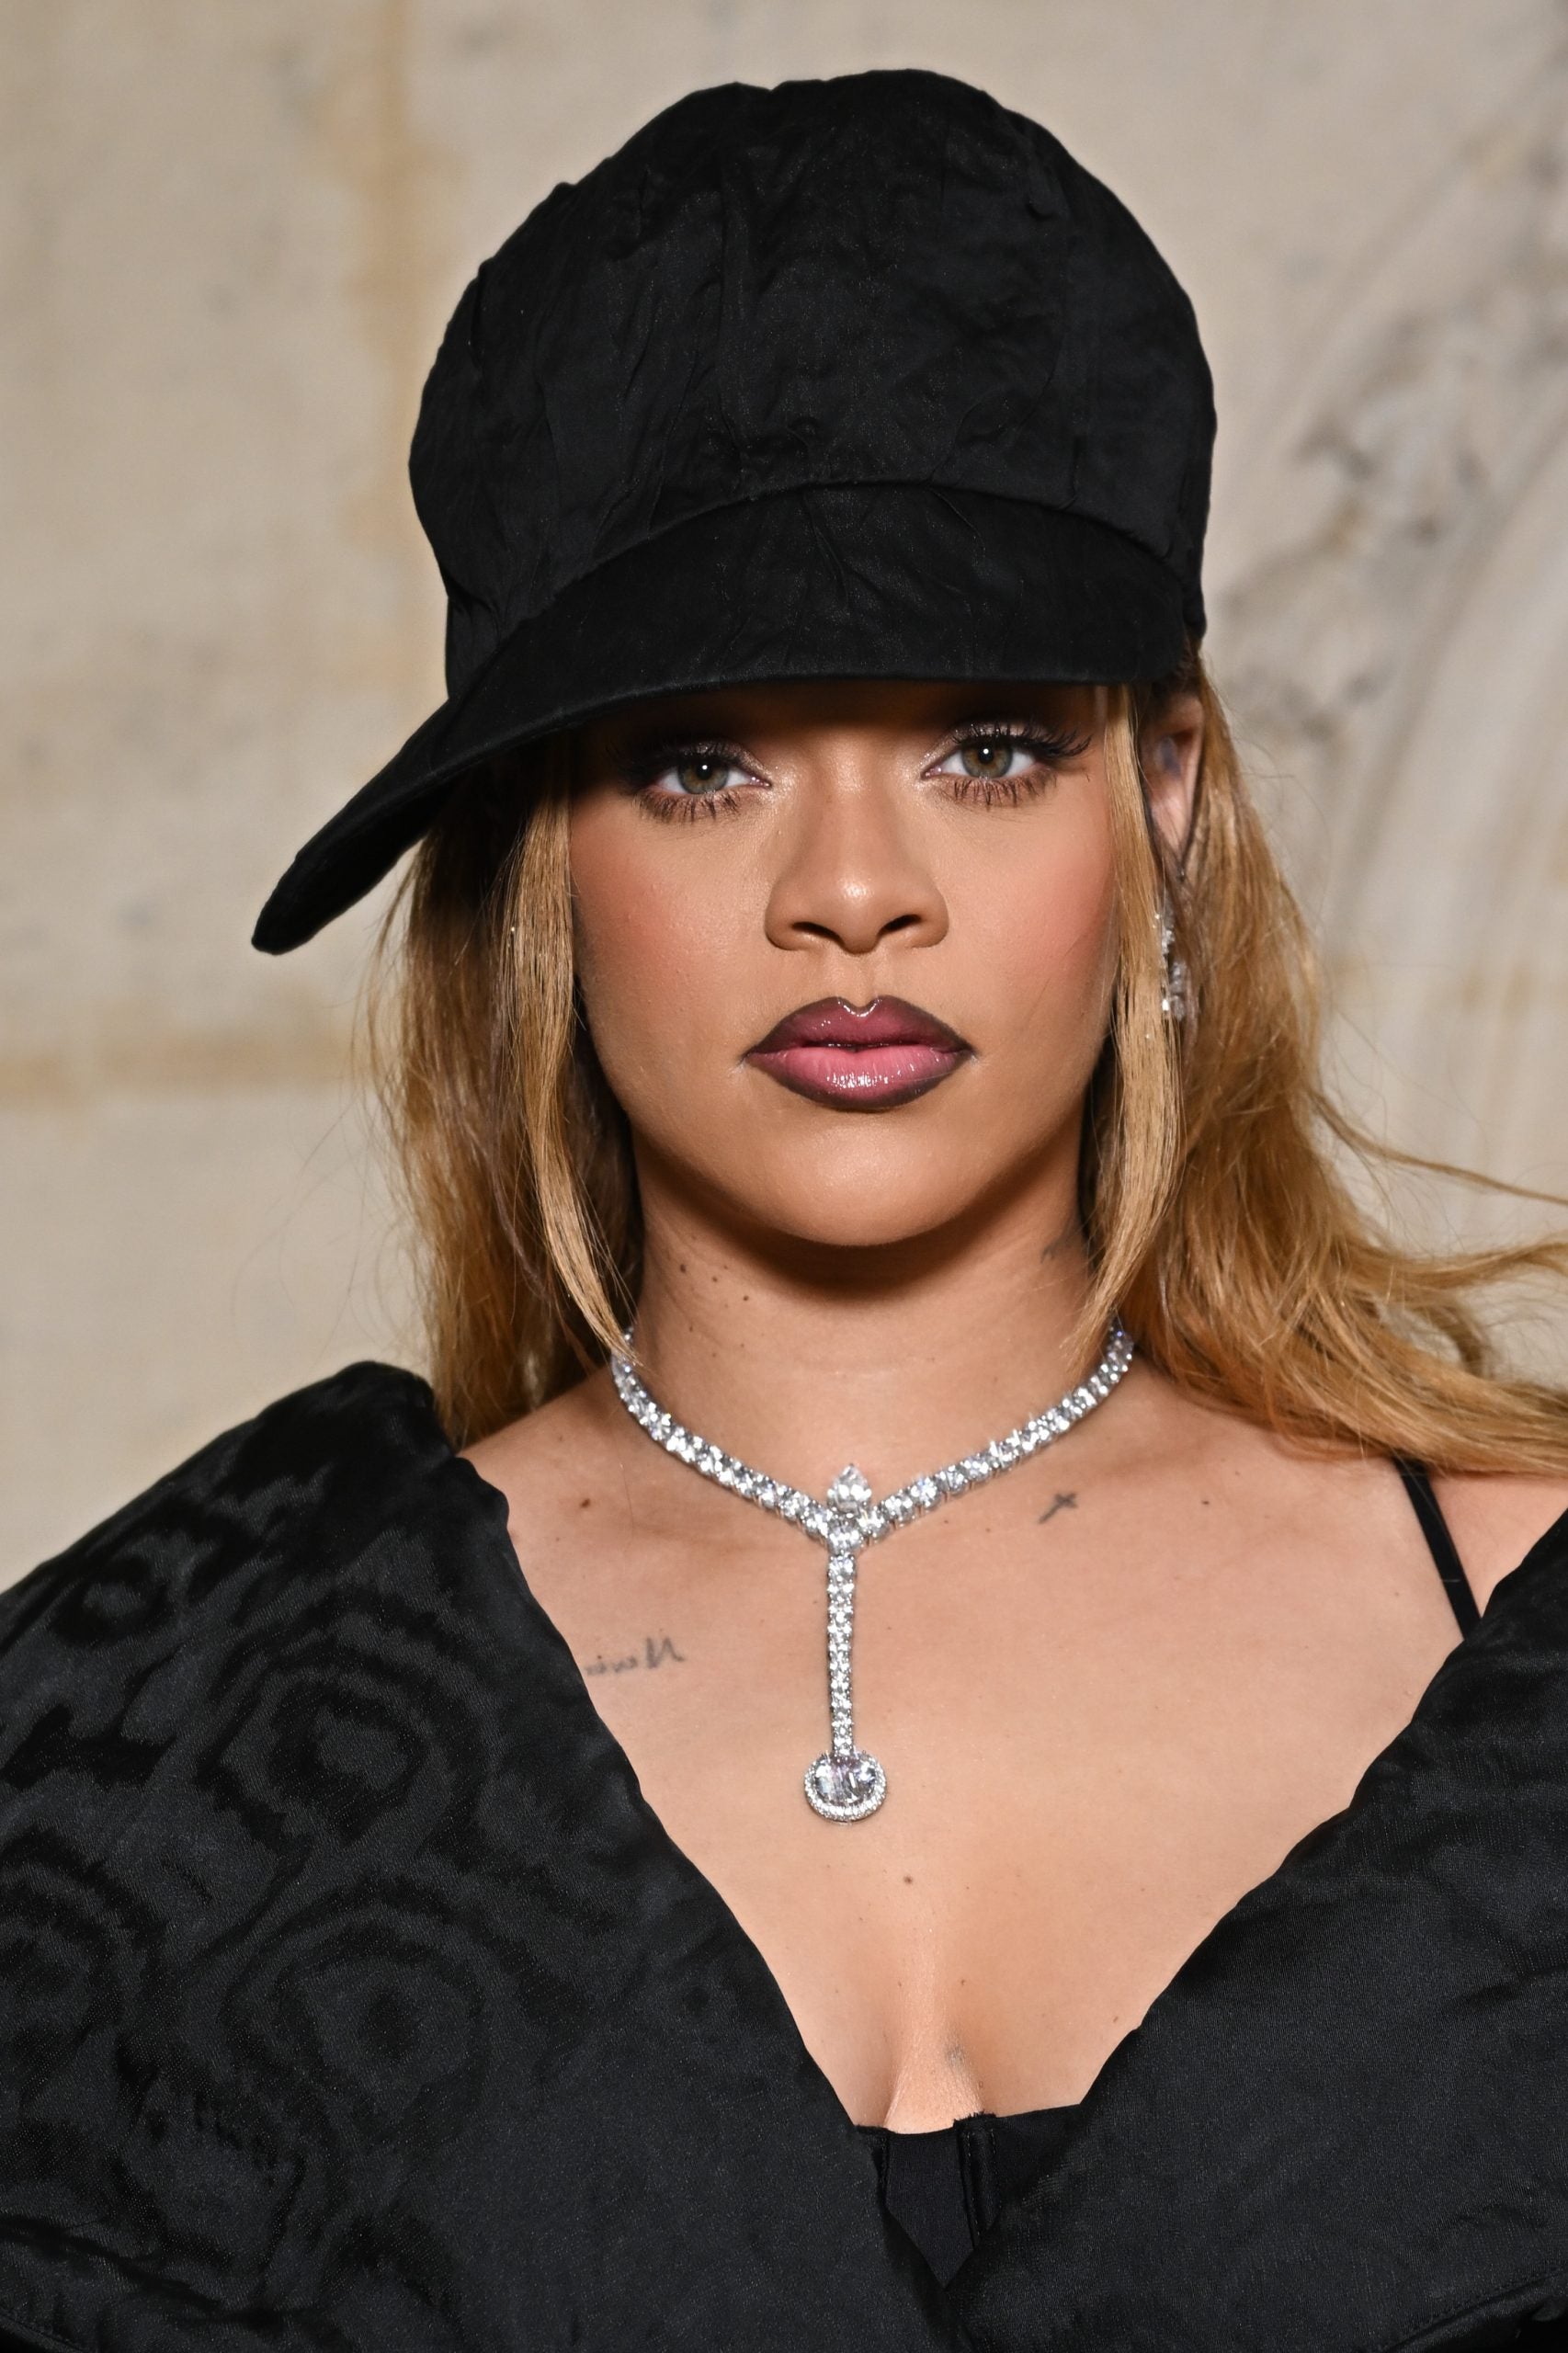 Spotted! Rihanna Arrived To Dior Couture In A Coquette Beauty Look